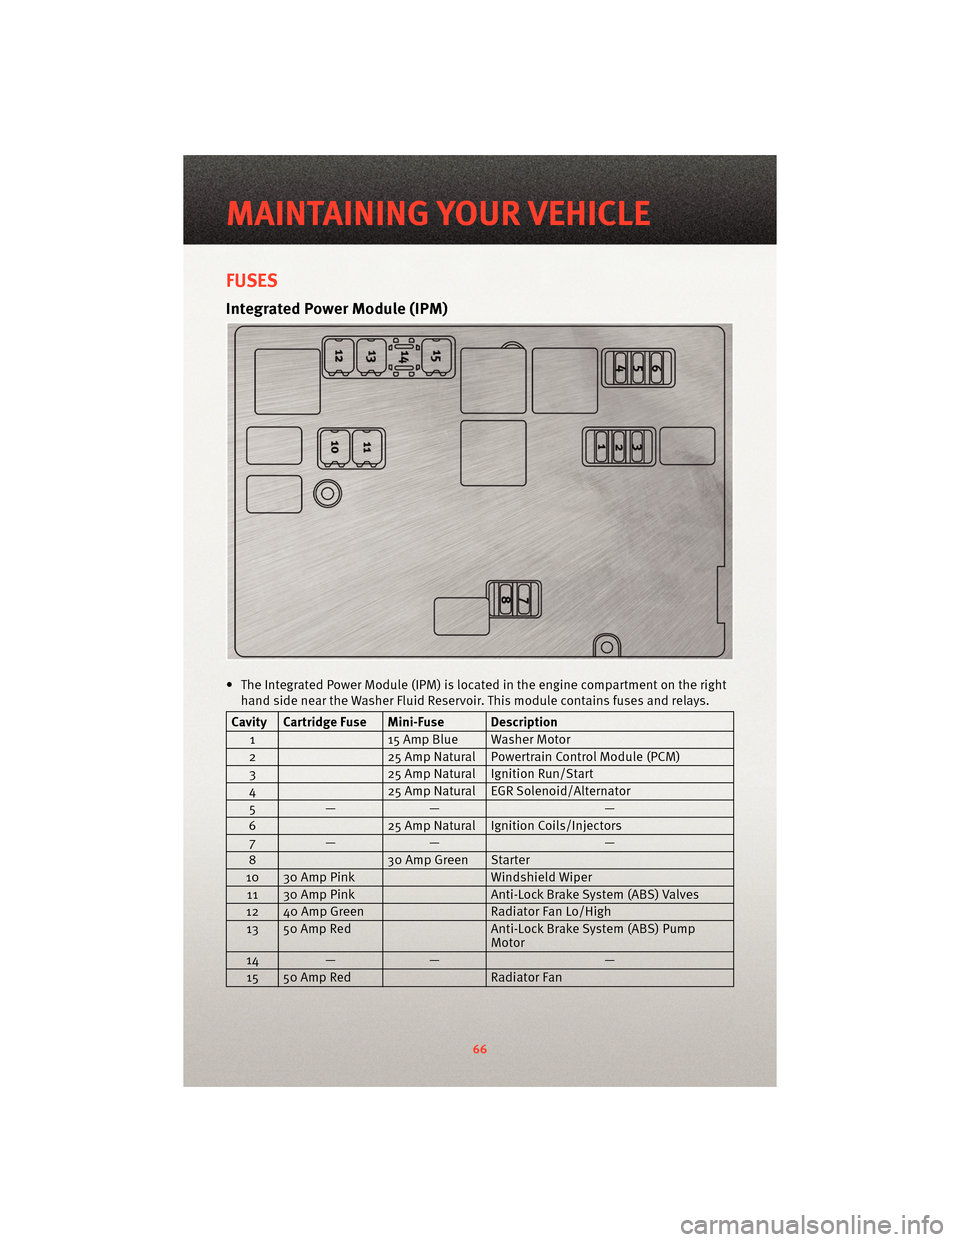 DODGE CHARGER 2010 7.G User Guide FUSES
Integrated Power Module (IPM)
• The Integrated Power Module (IPM) is located in the engine compartment on the righthand side near the Washer Fluid Reservoir. This module contains fuses and rel